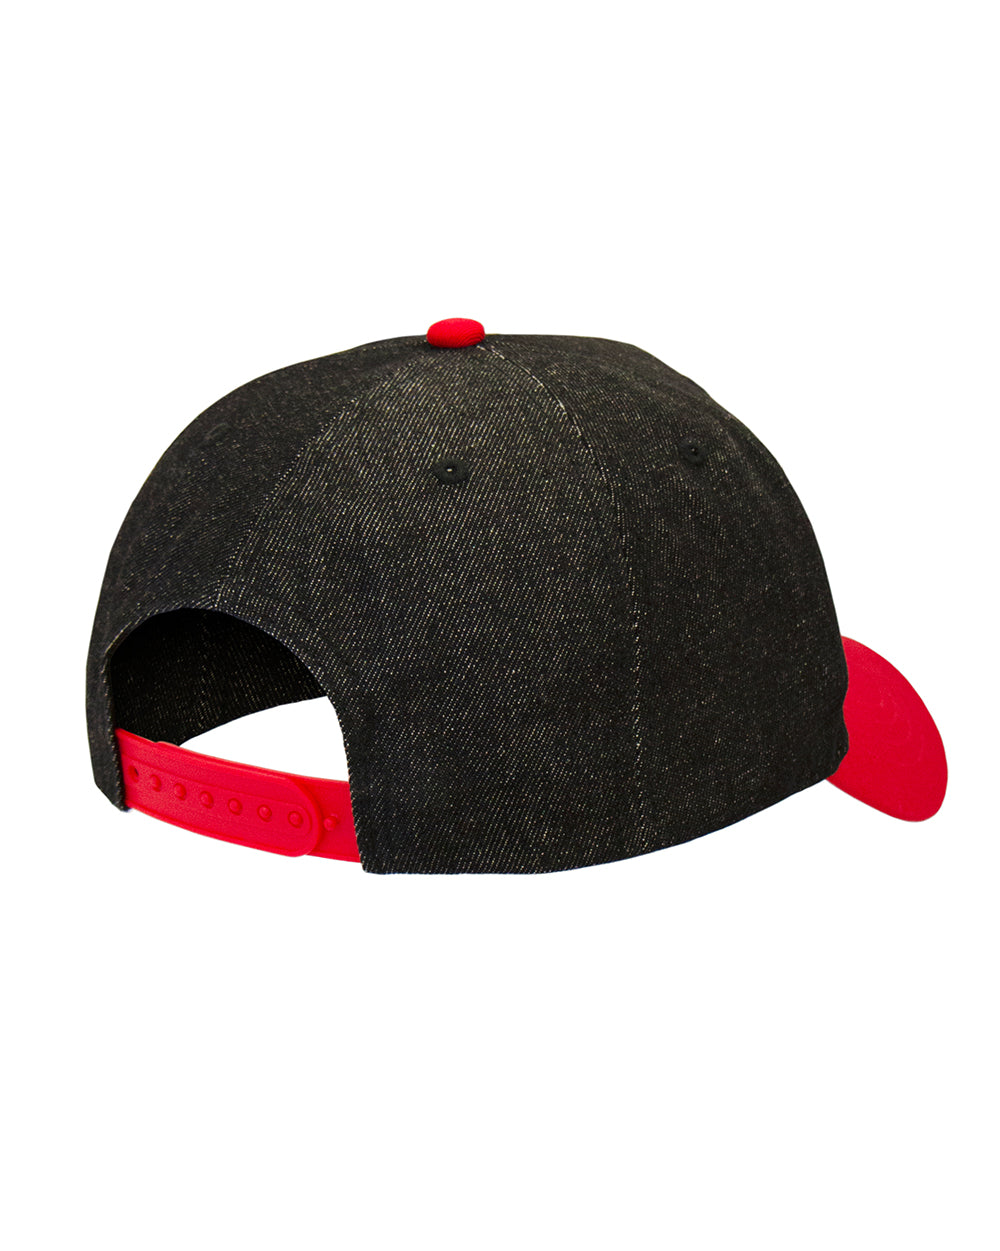 Lion Red Cap -  Beer Gear Apparel & Merchandise - Speights - Lion Red - VB - Tokyo Dy merch